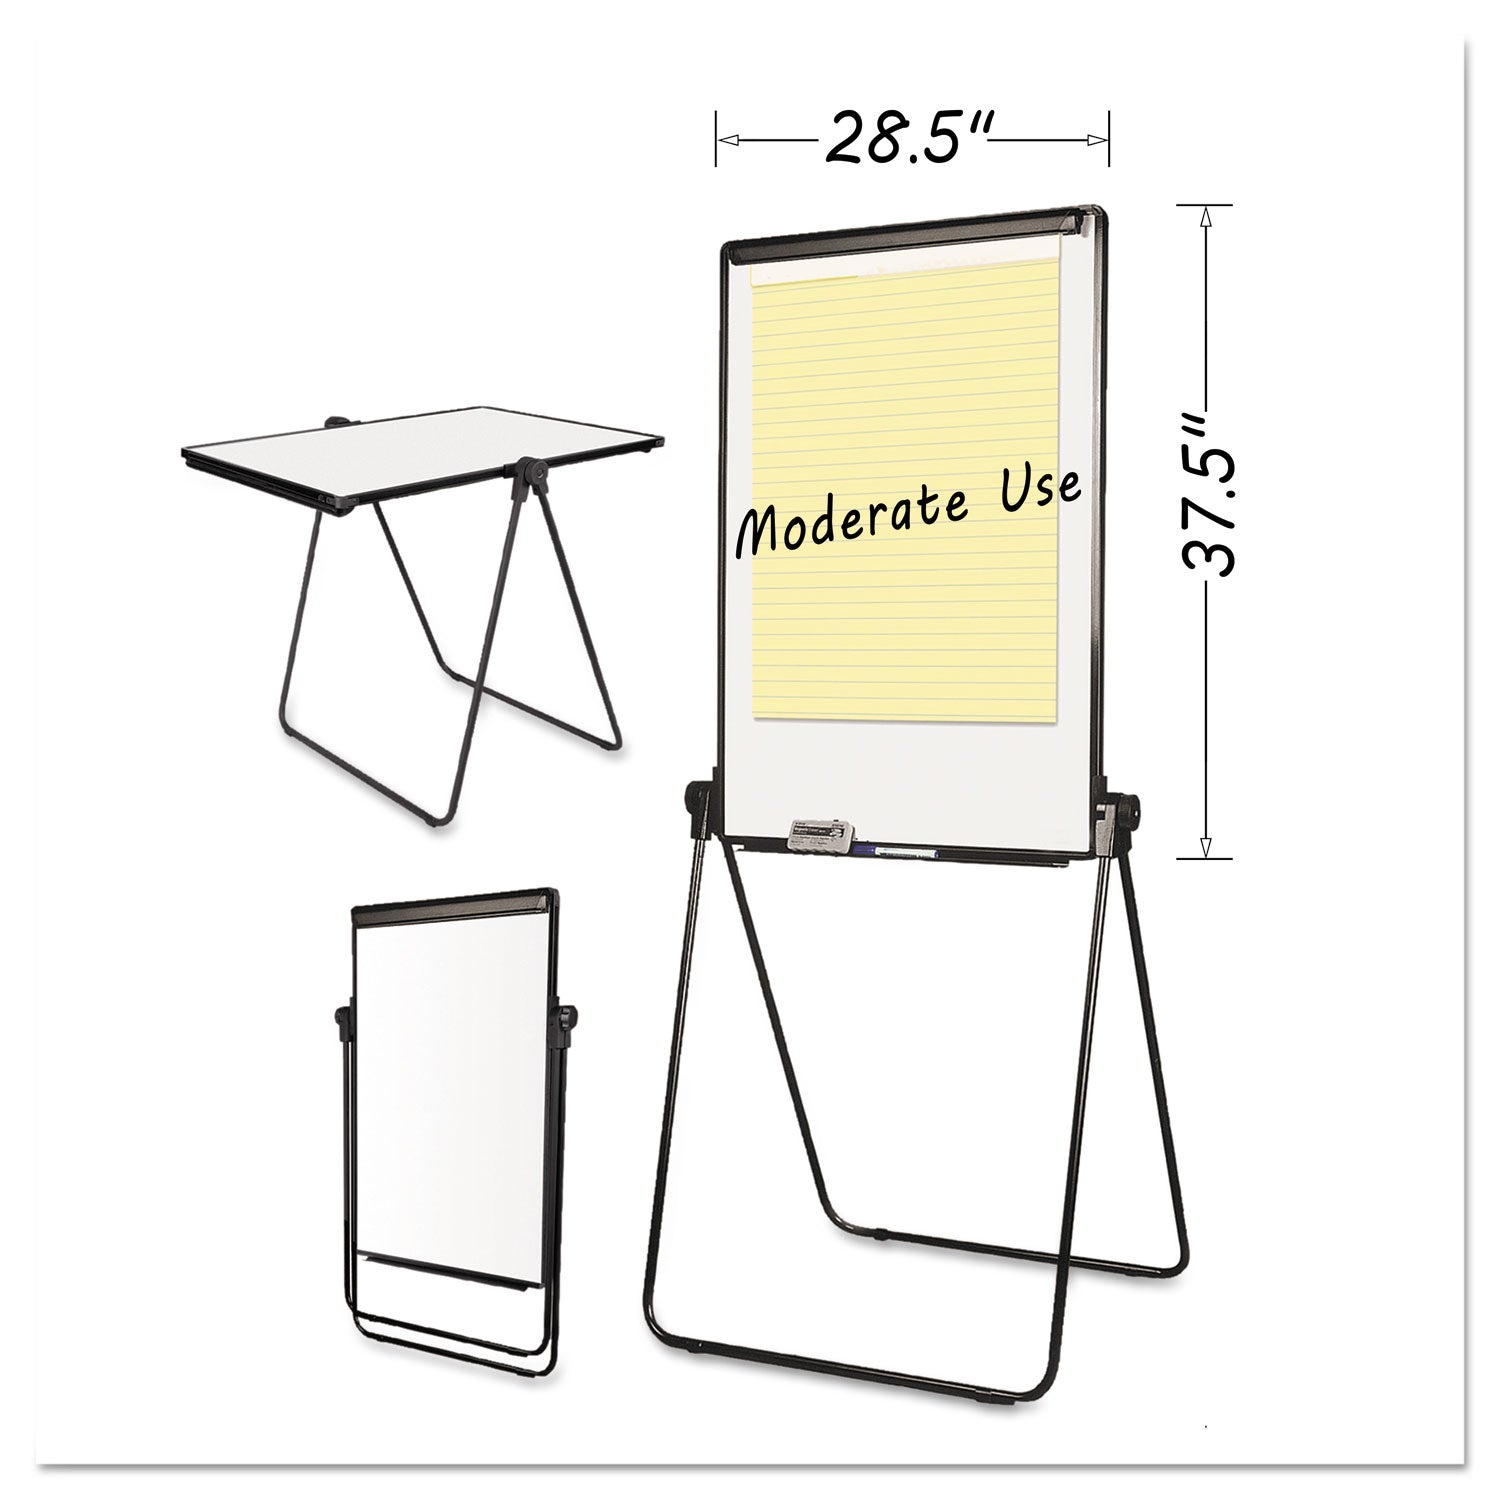 Folds-to-a-Table Melamine Easel, 28.5 x 37.5, White, Steel/Laminate - 